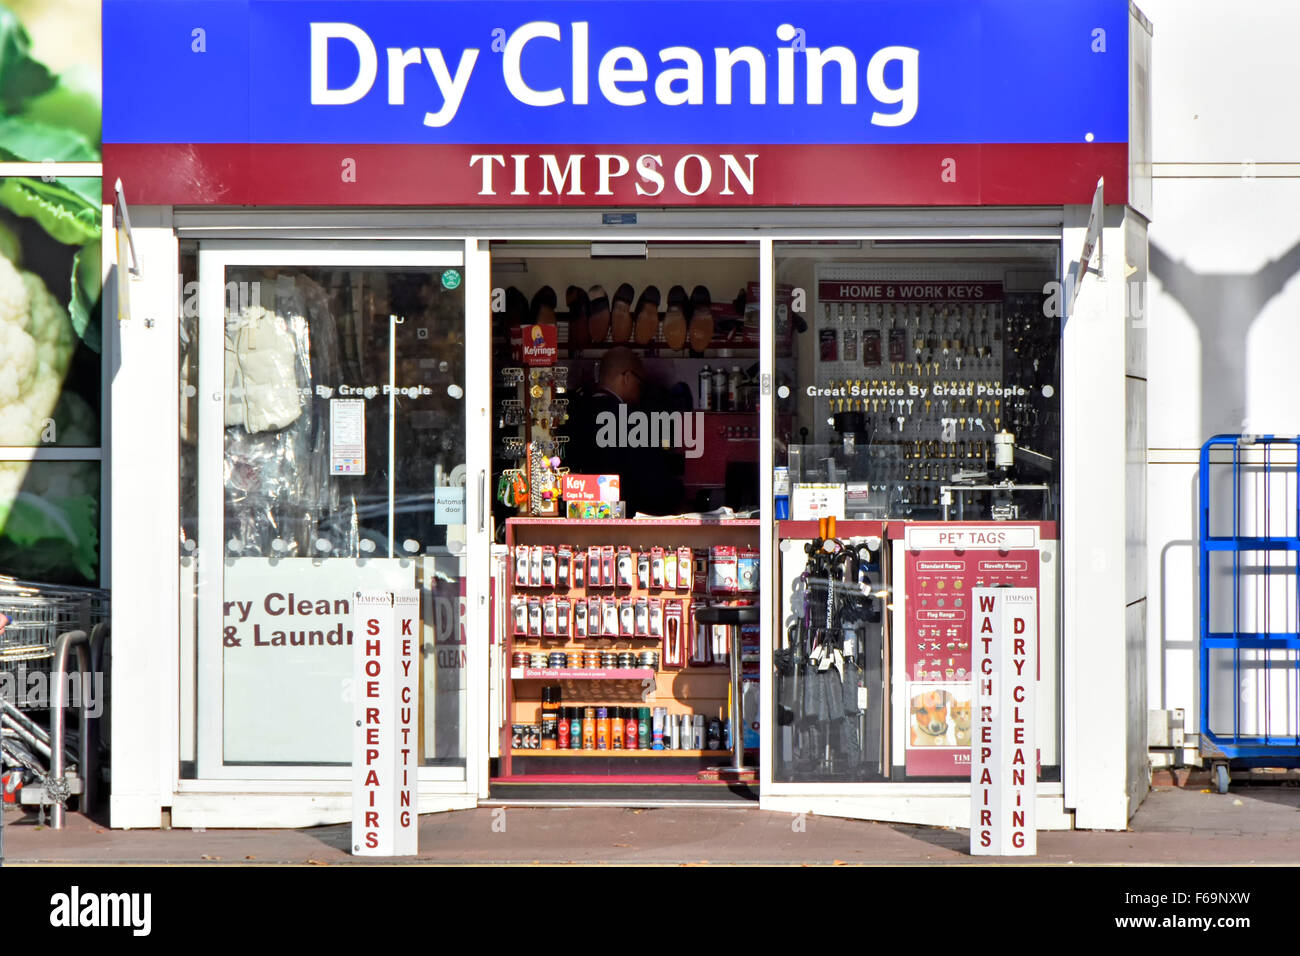 Timpson Dry Cleaning retail business collection and repair kiosk shop front beside main entrance to Tesco Extra supermarket store London England UK Stock Photo